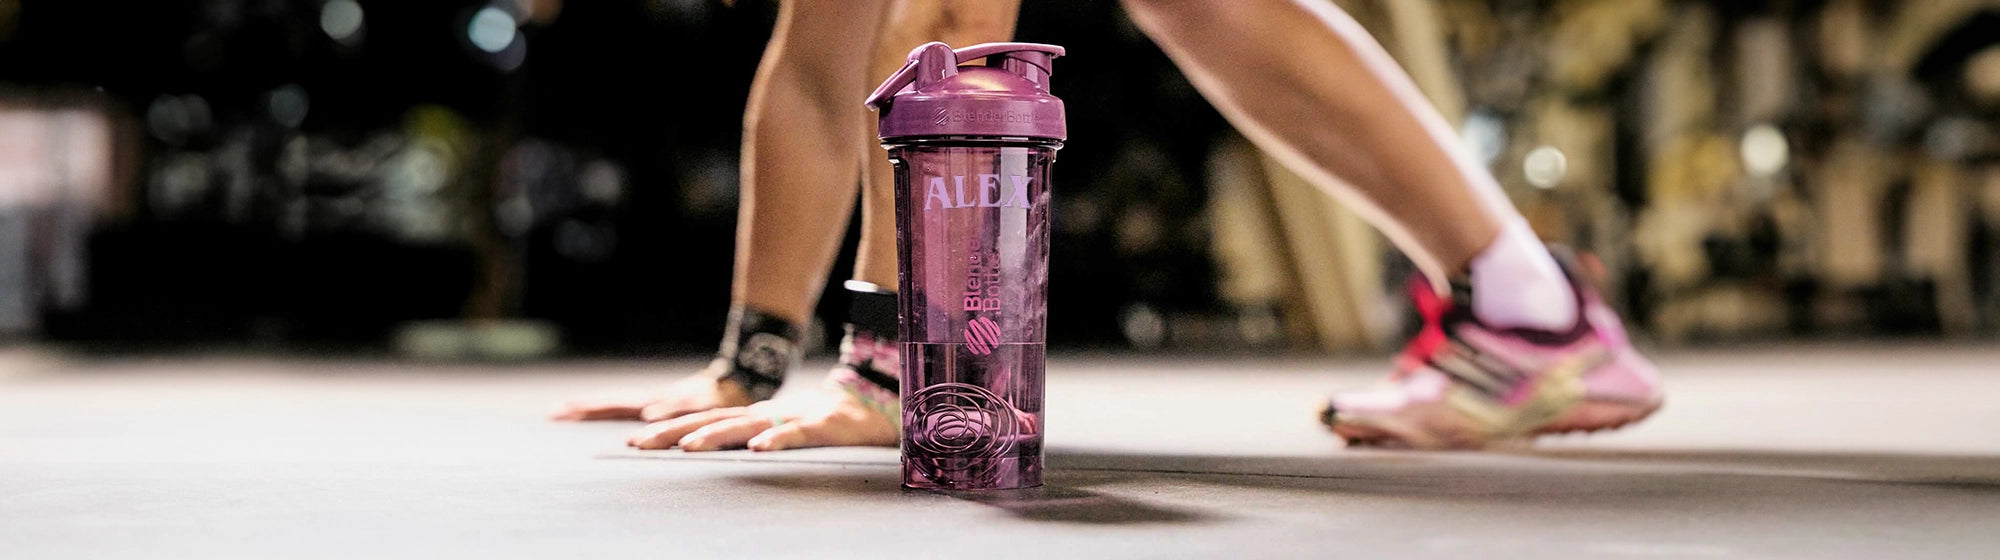 purple blenderbottle protein shaker bottle personalized with name "alex"